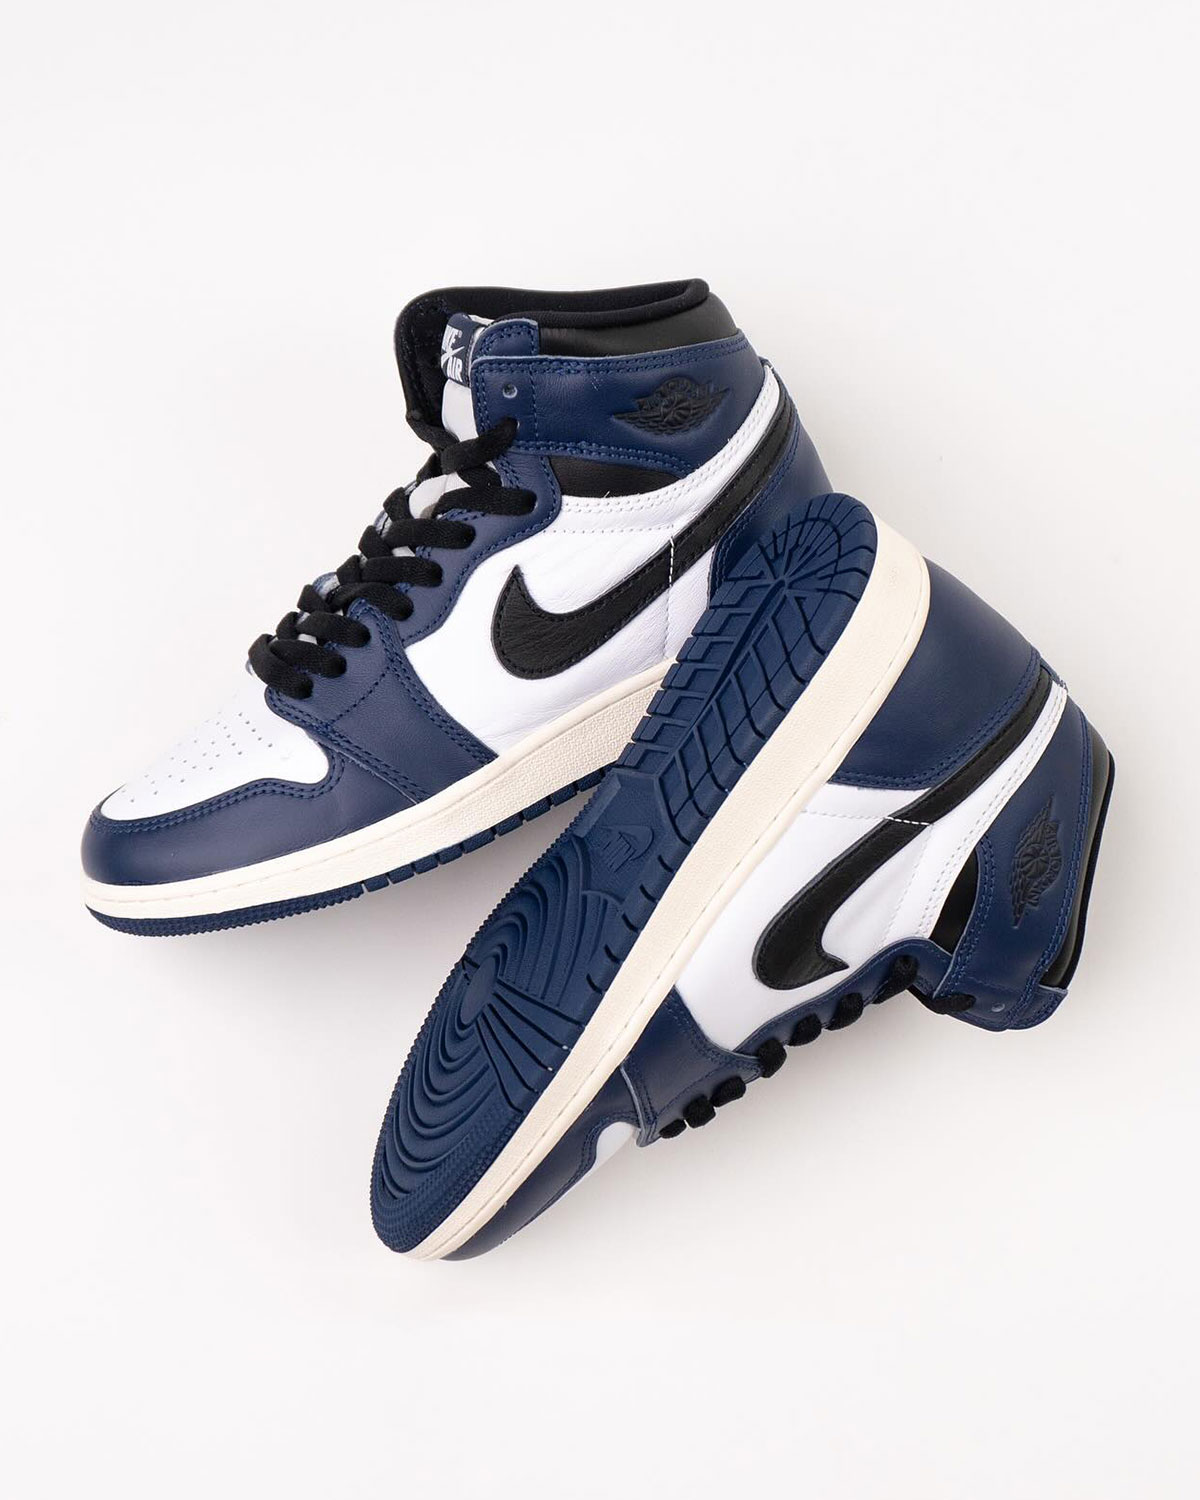 Do you really know the history of the Air Jordan Selection 1 Retro High Og Midnight Navy Dz5485 401 7